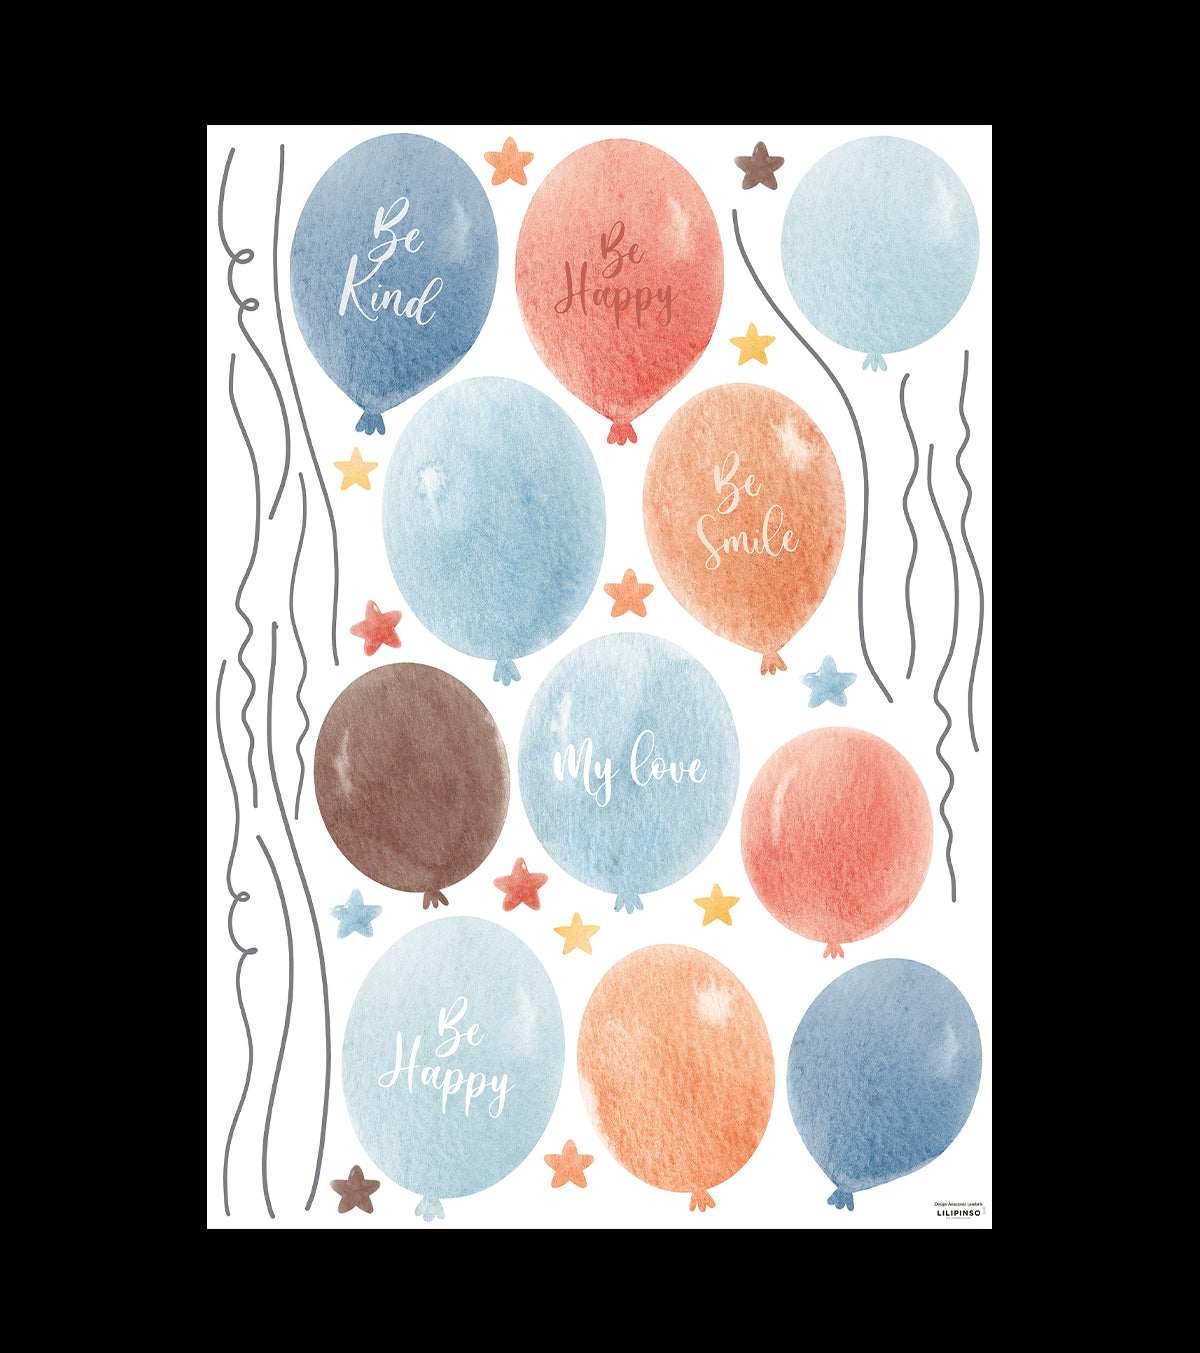 GENTLE FRIENDS - Wall decals Walls - Large balloons